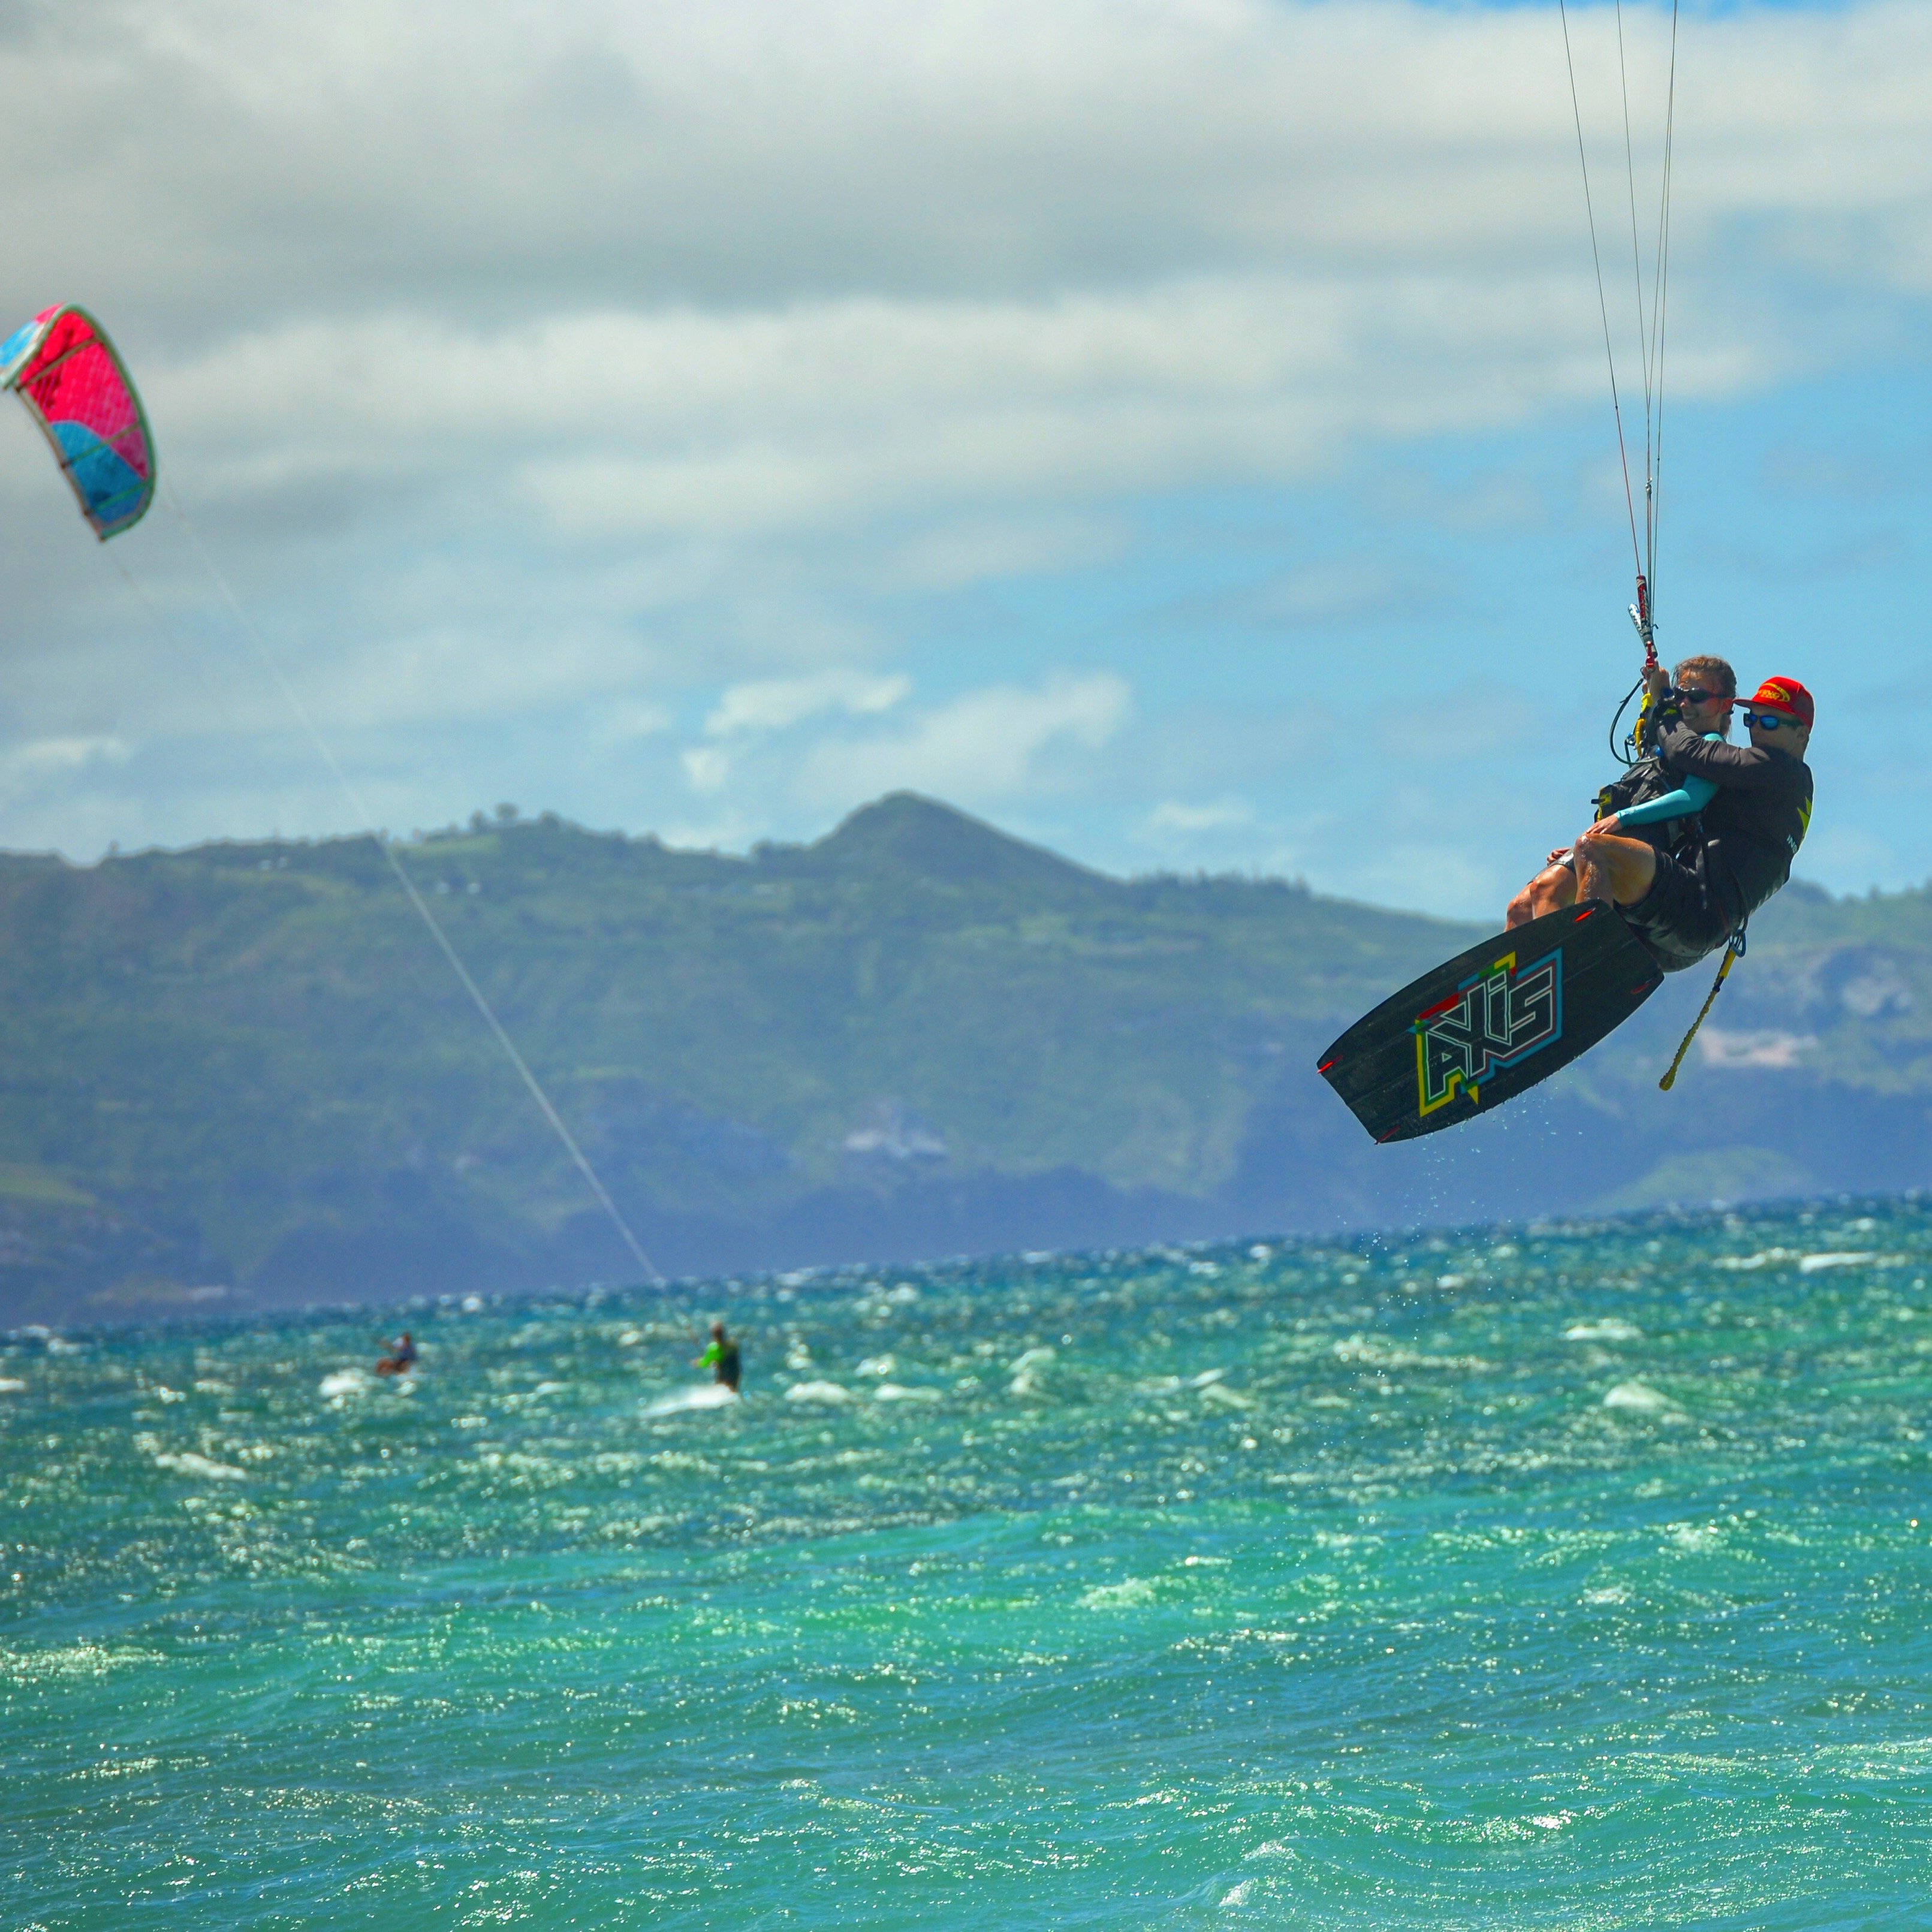 The Tandem Kiting Adventure | Exclusively at Kiting.com | Maui, Hawaii